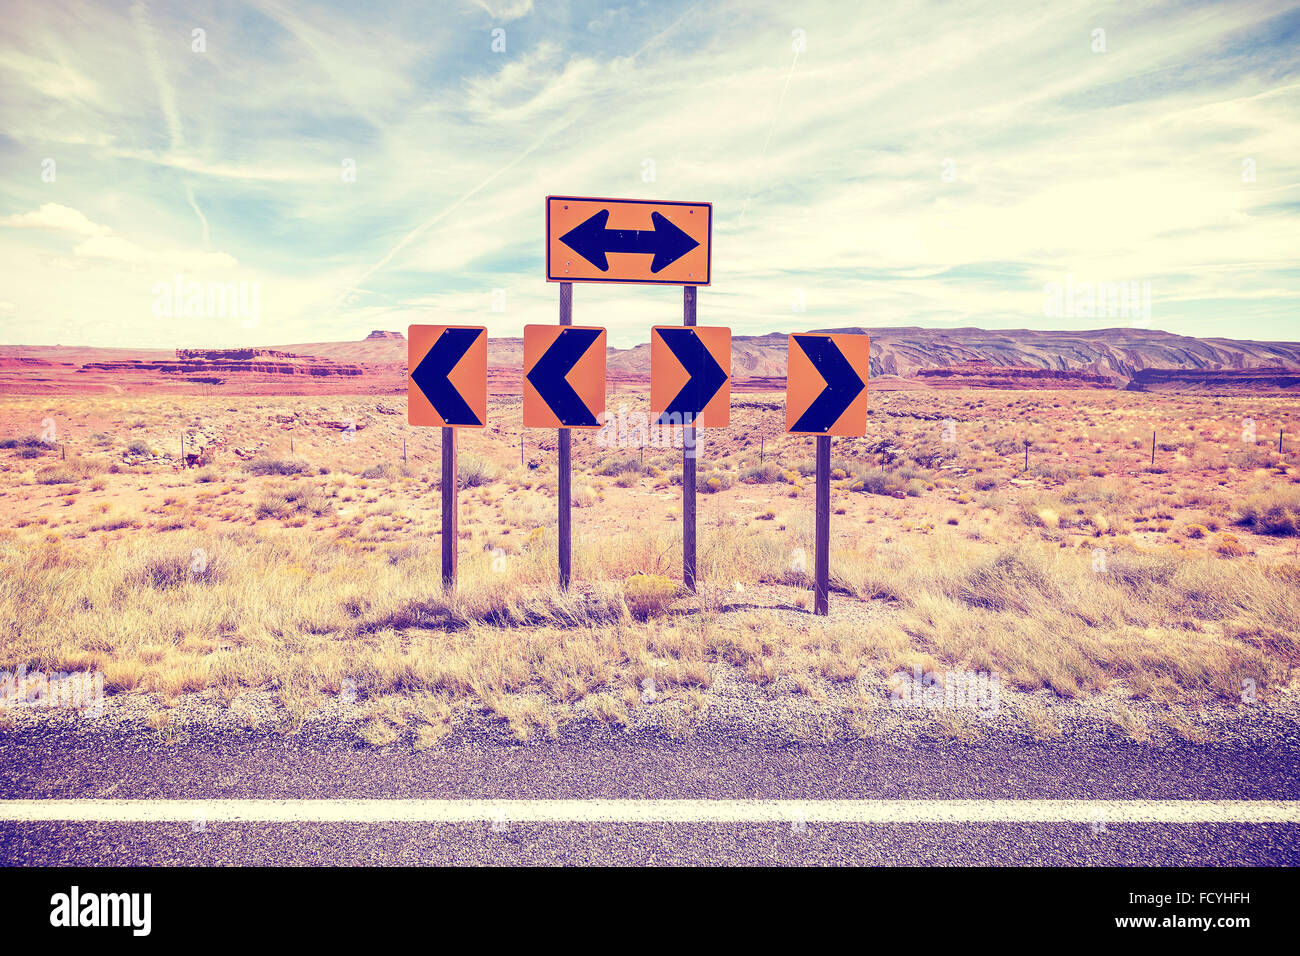 Vintage stylized photo of road signs, choice concept. Stock Photo